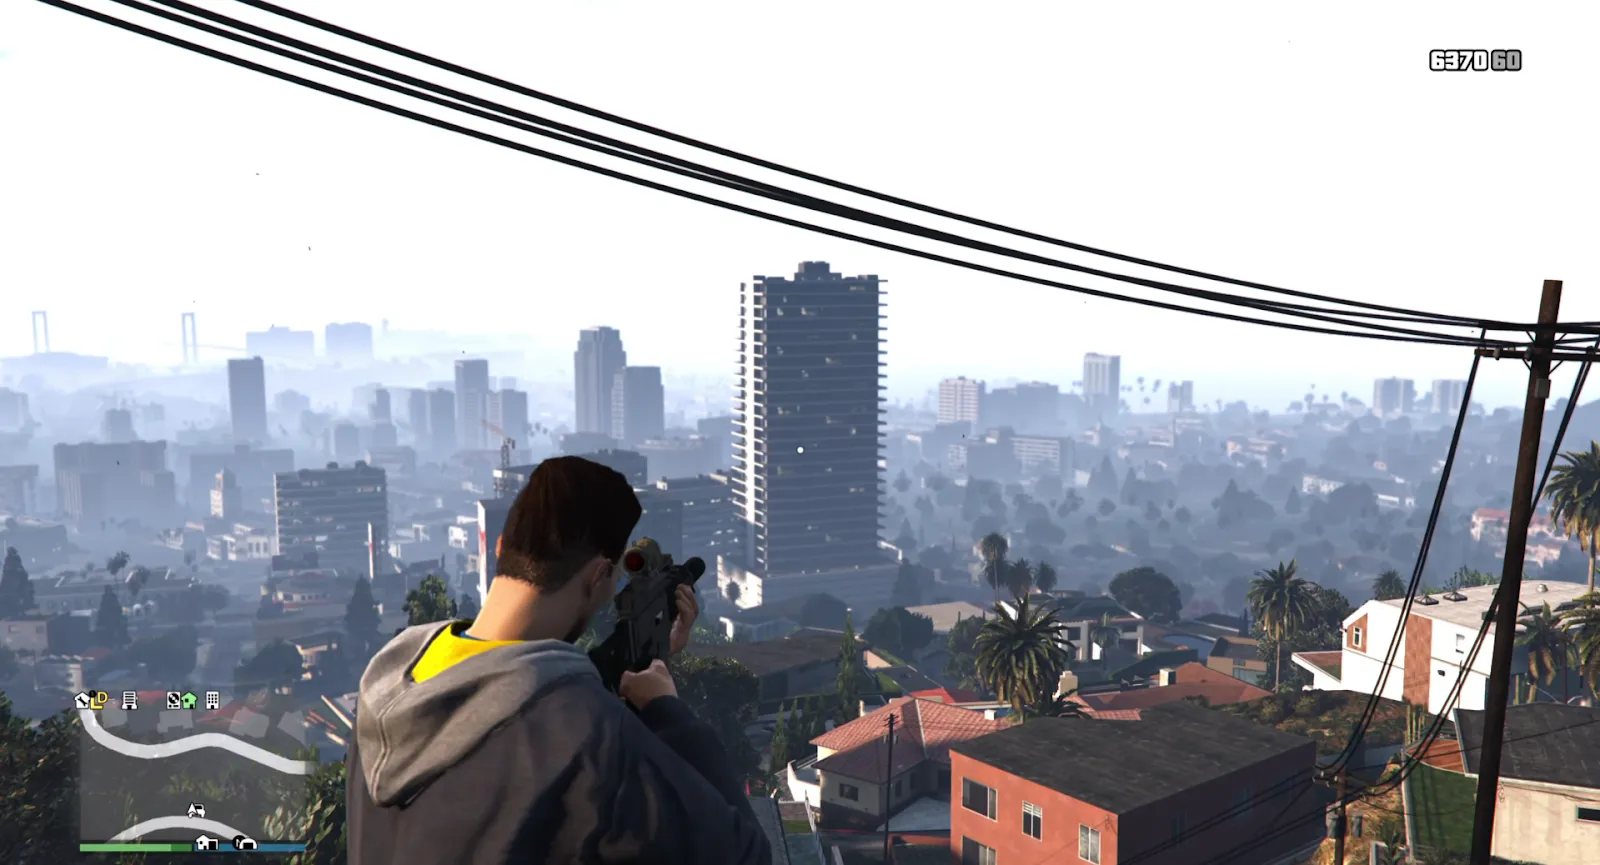 GTA V Online would've been ideal if it wasn't for the bots.